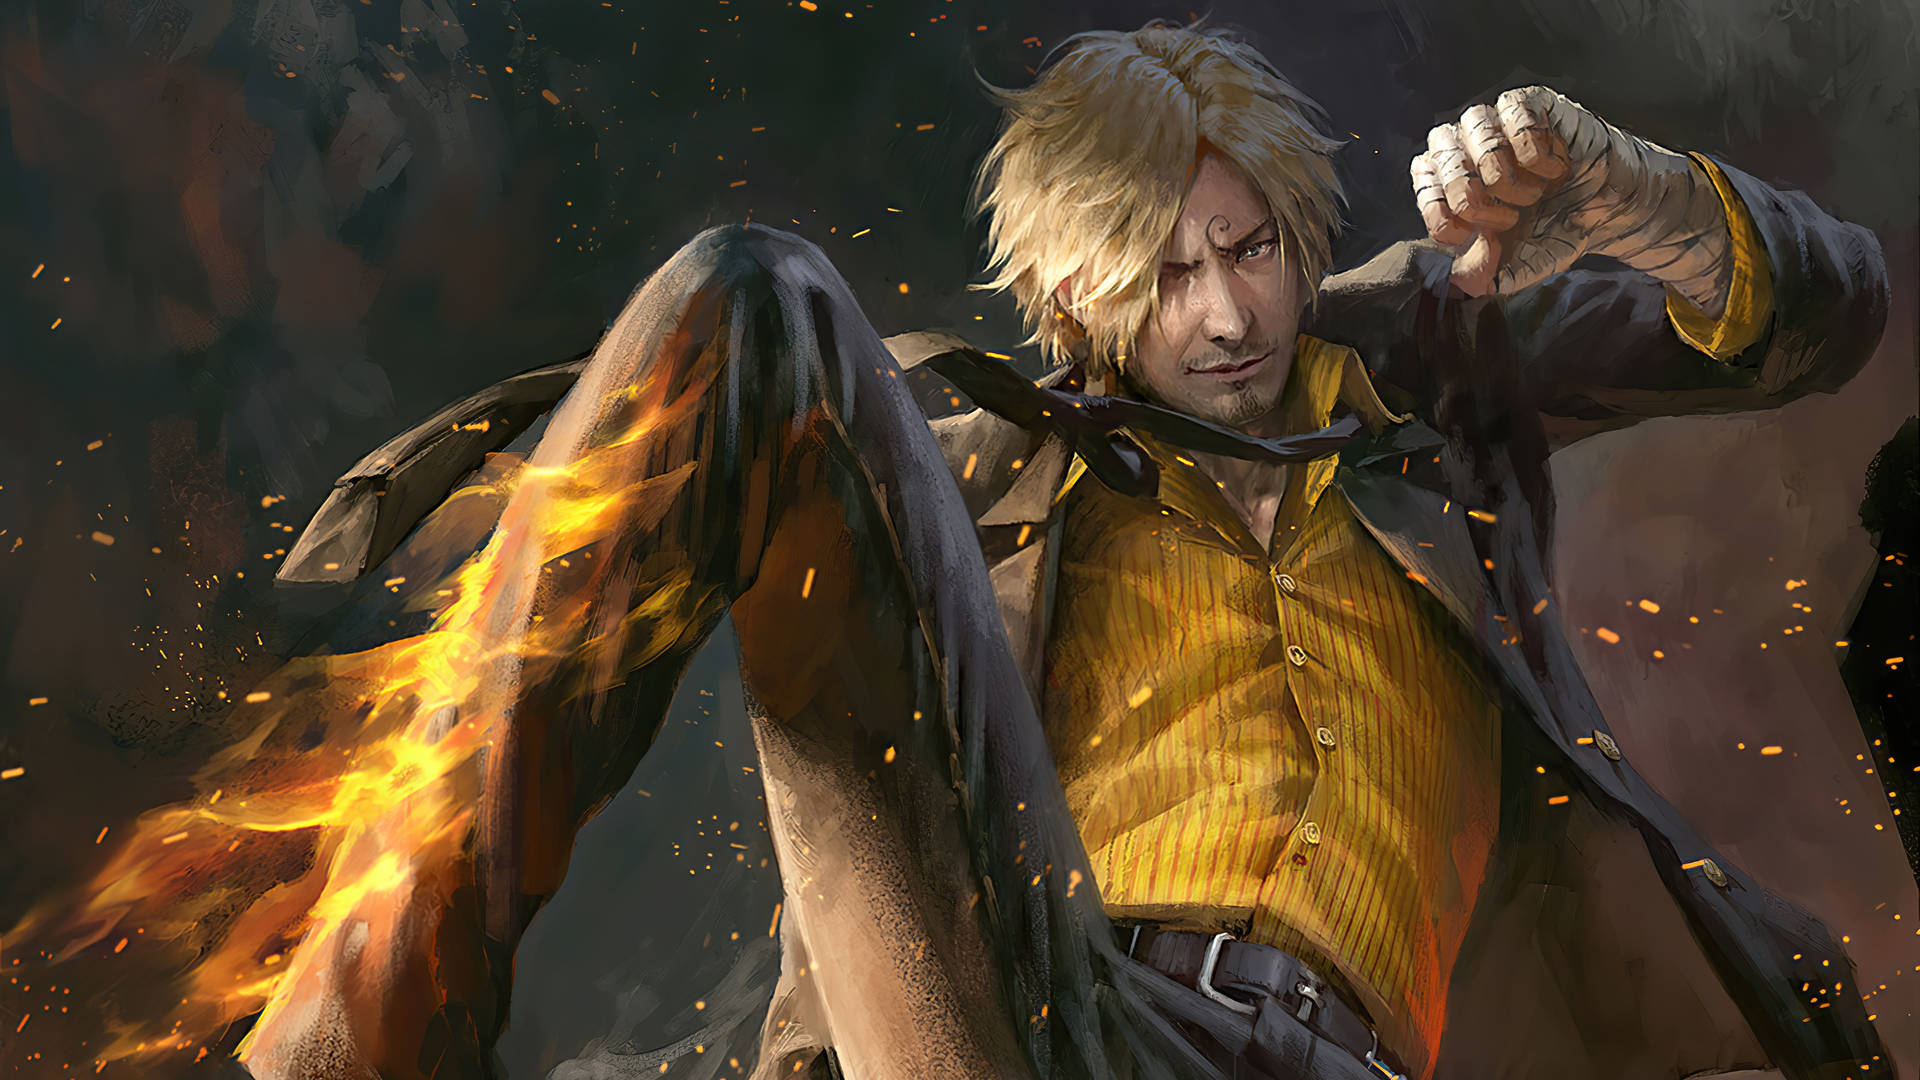 Enjoy This 3d Rendering Of Sanji, A Character From The Popular Anime Show, One Piece.